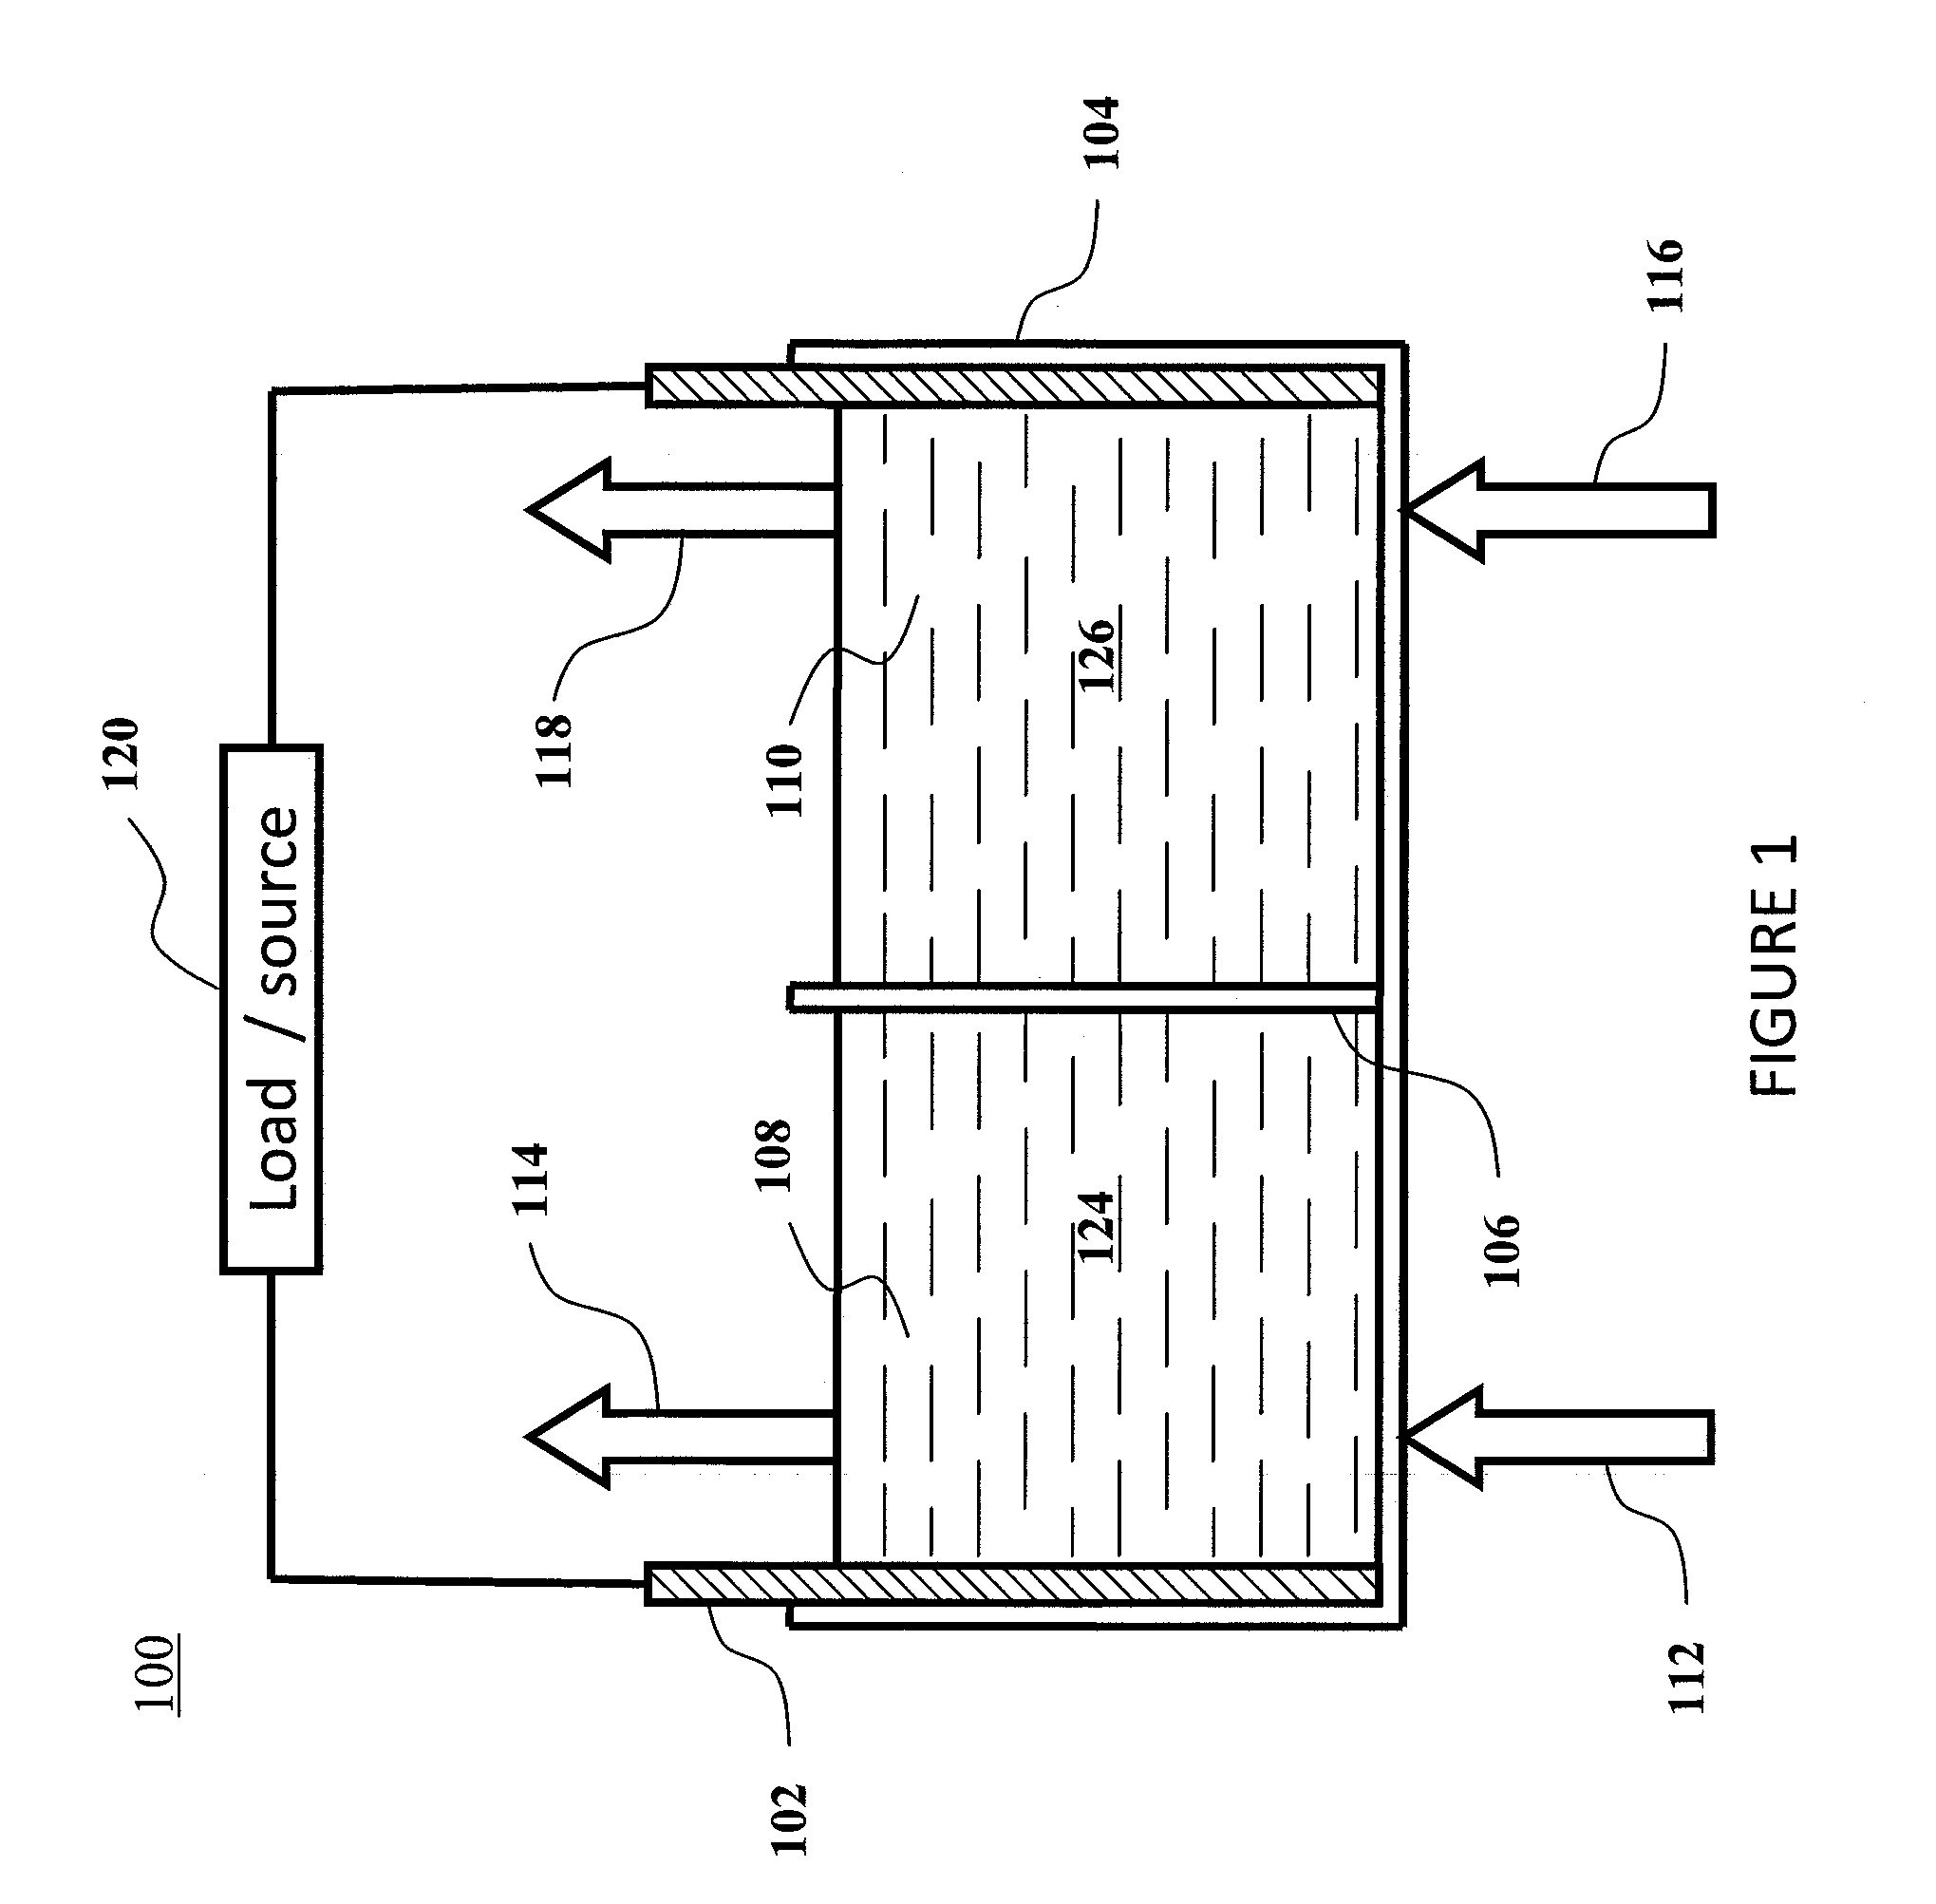 Methods for the preparation of electrolytes for chromium-iron redox flow batteries